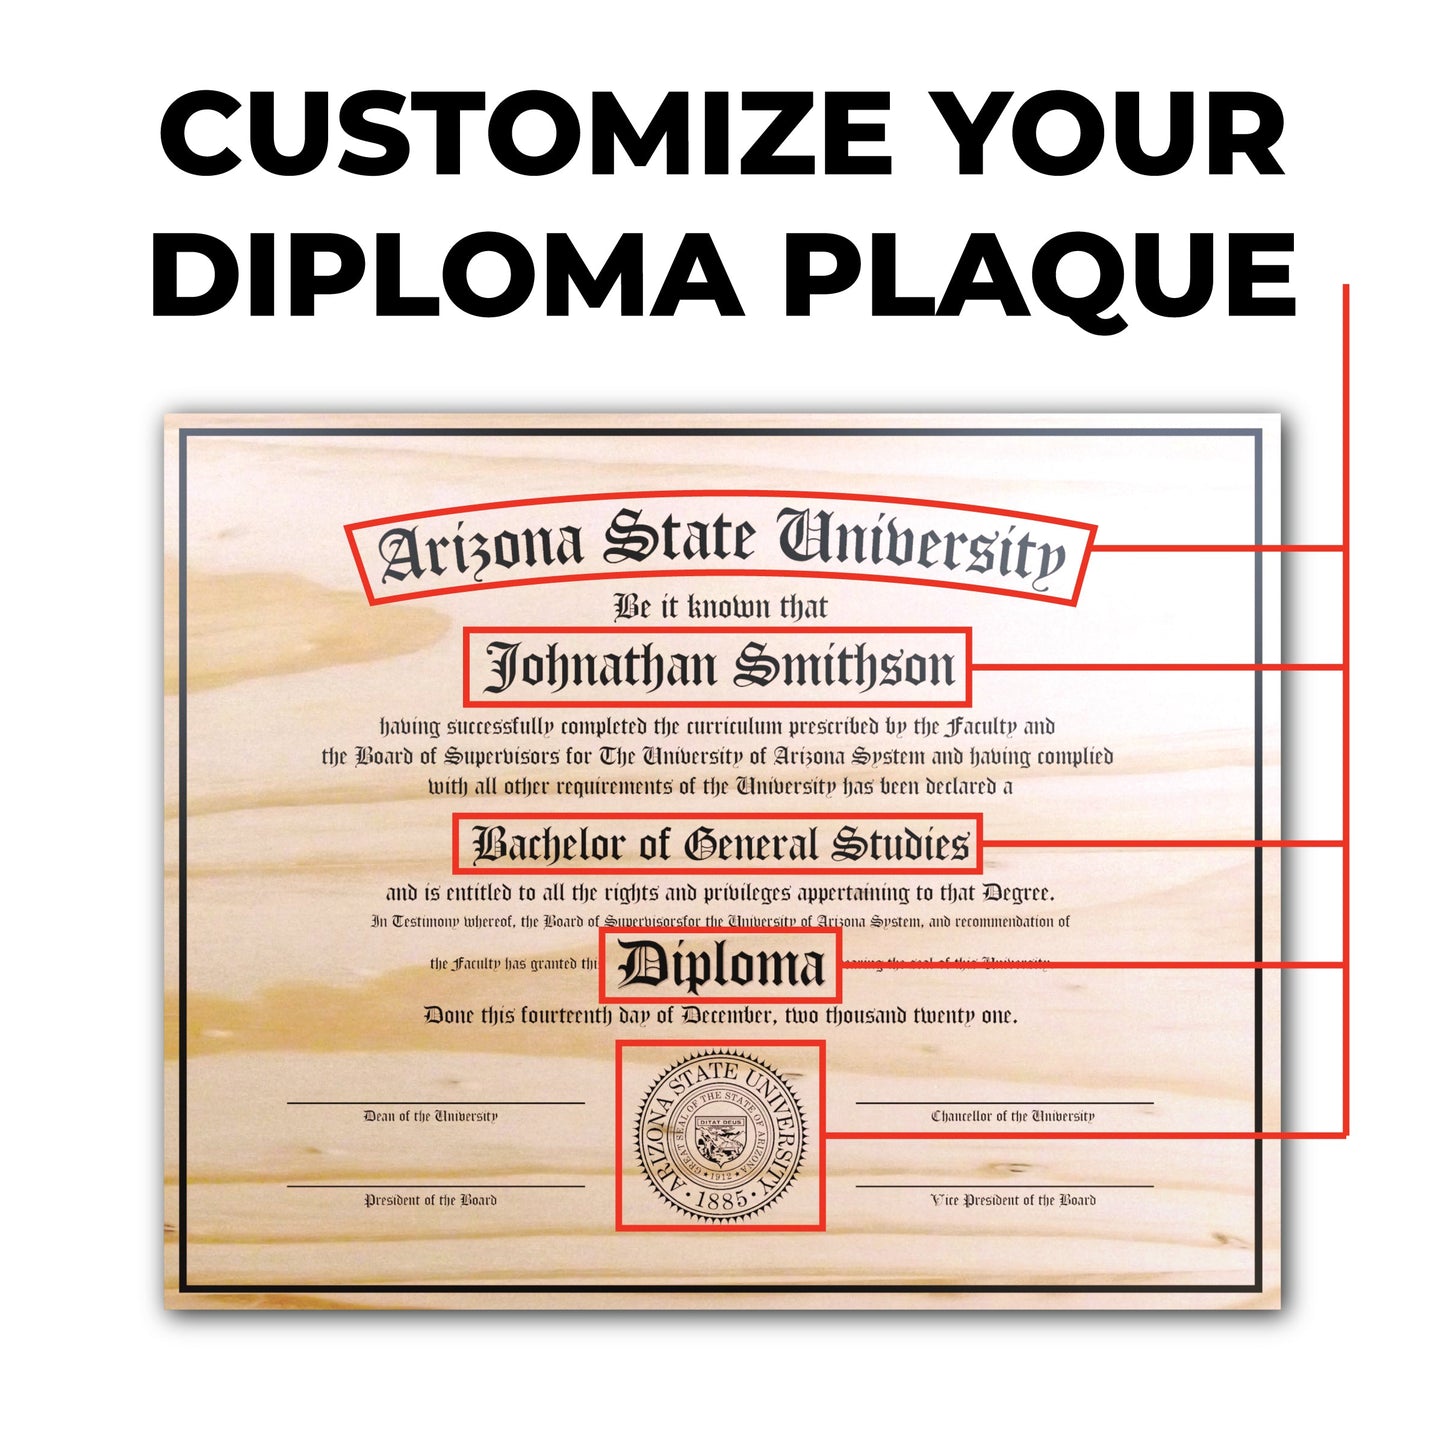 Engraved Diploma On Wood Plaque